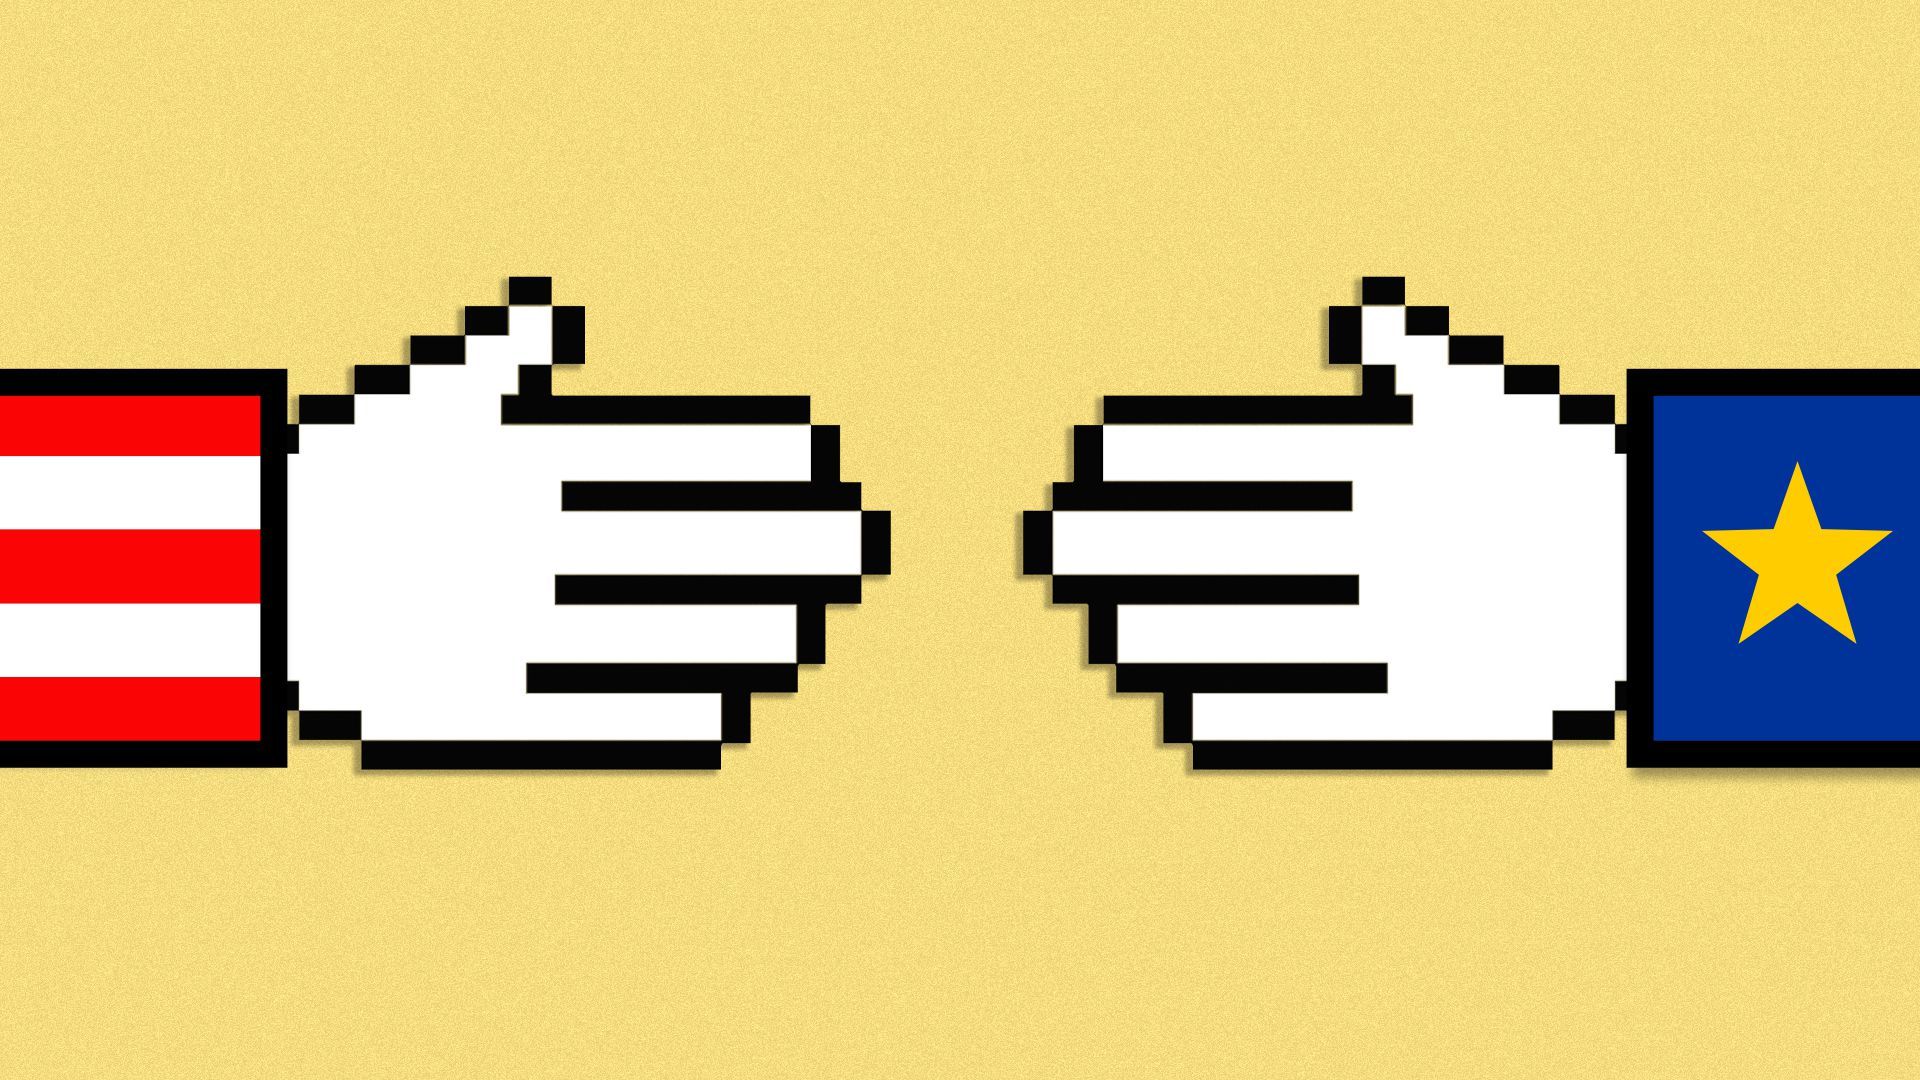 Illustration of two cursors shaking hands, with sleeves showing the US and European Union flags.